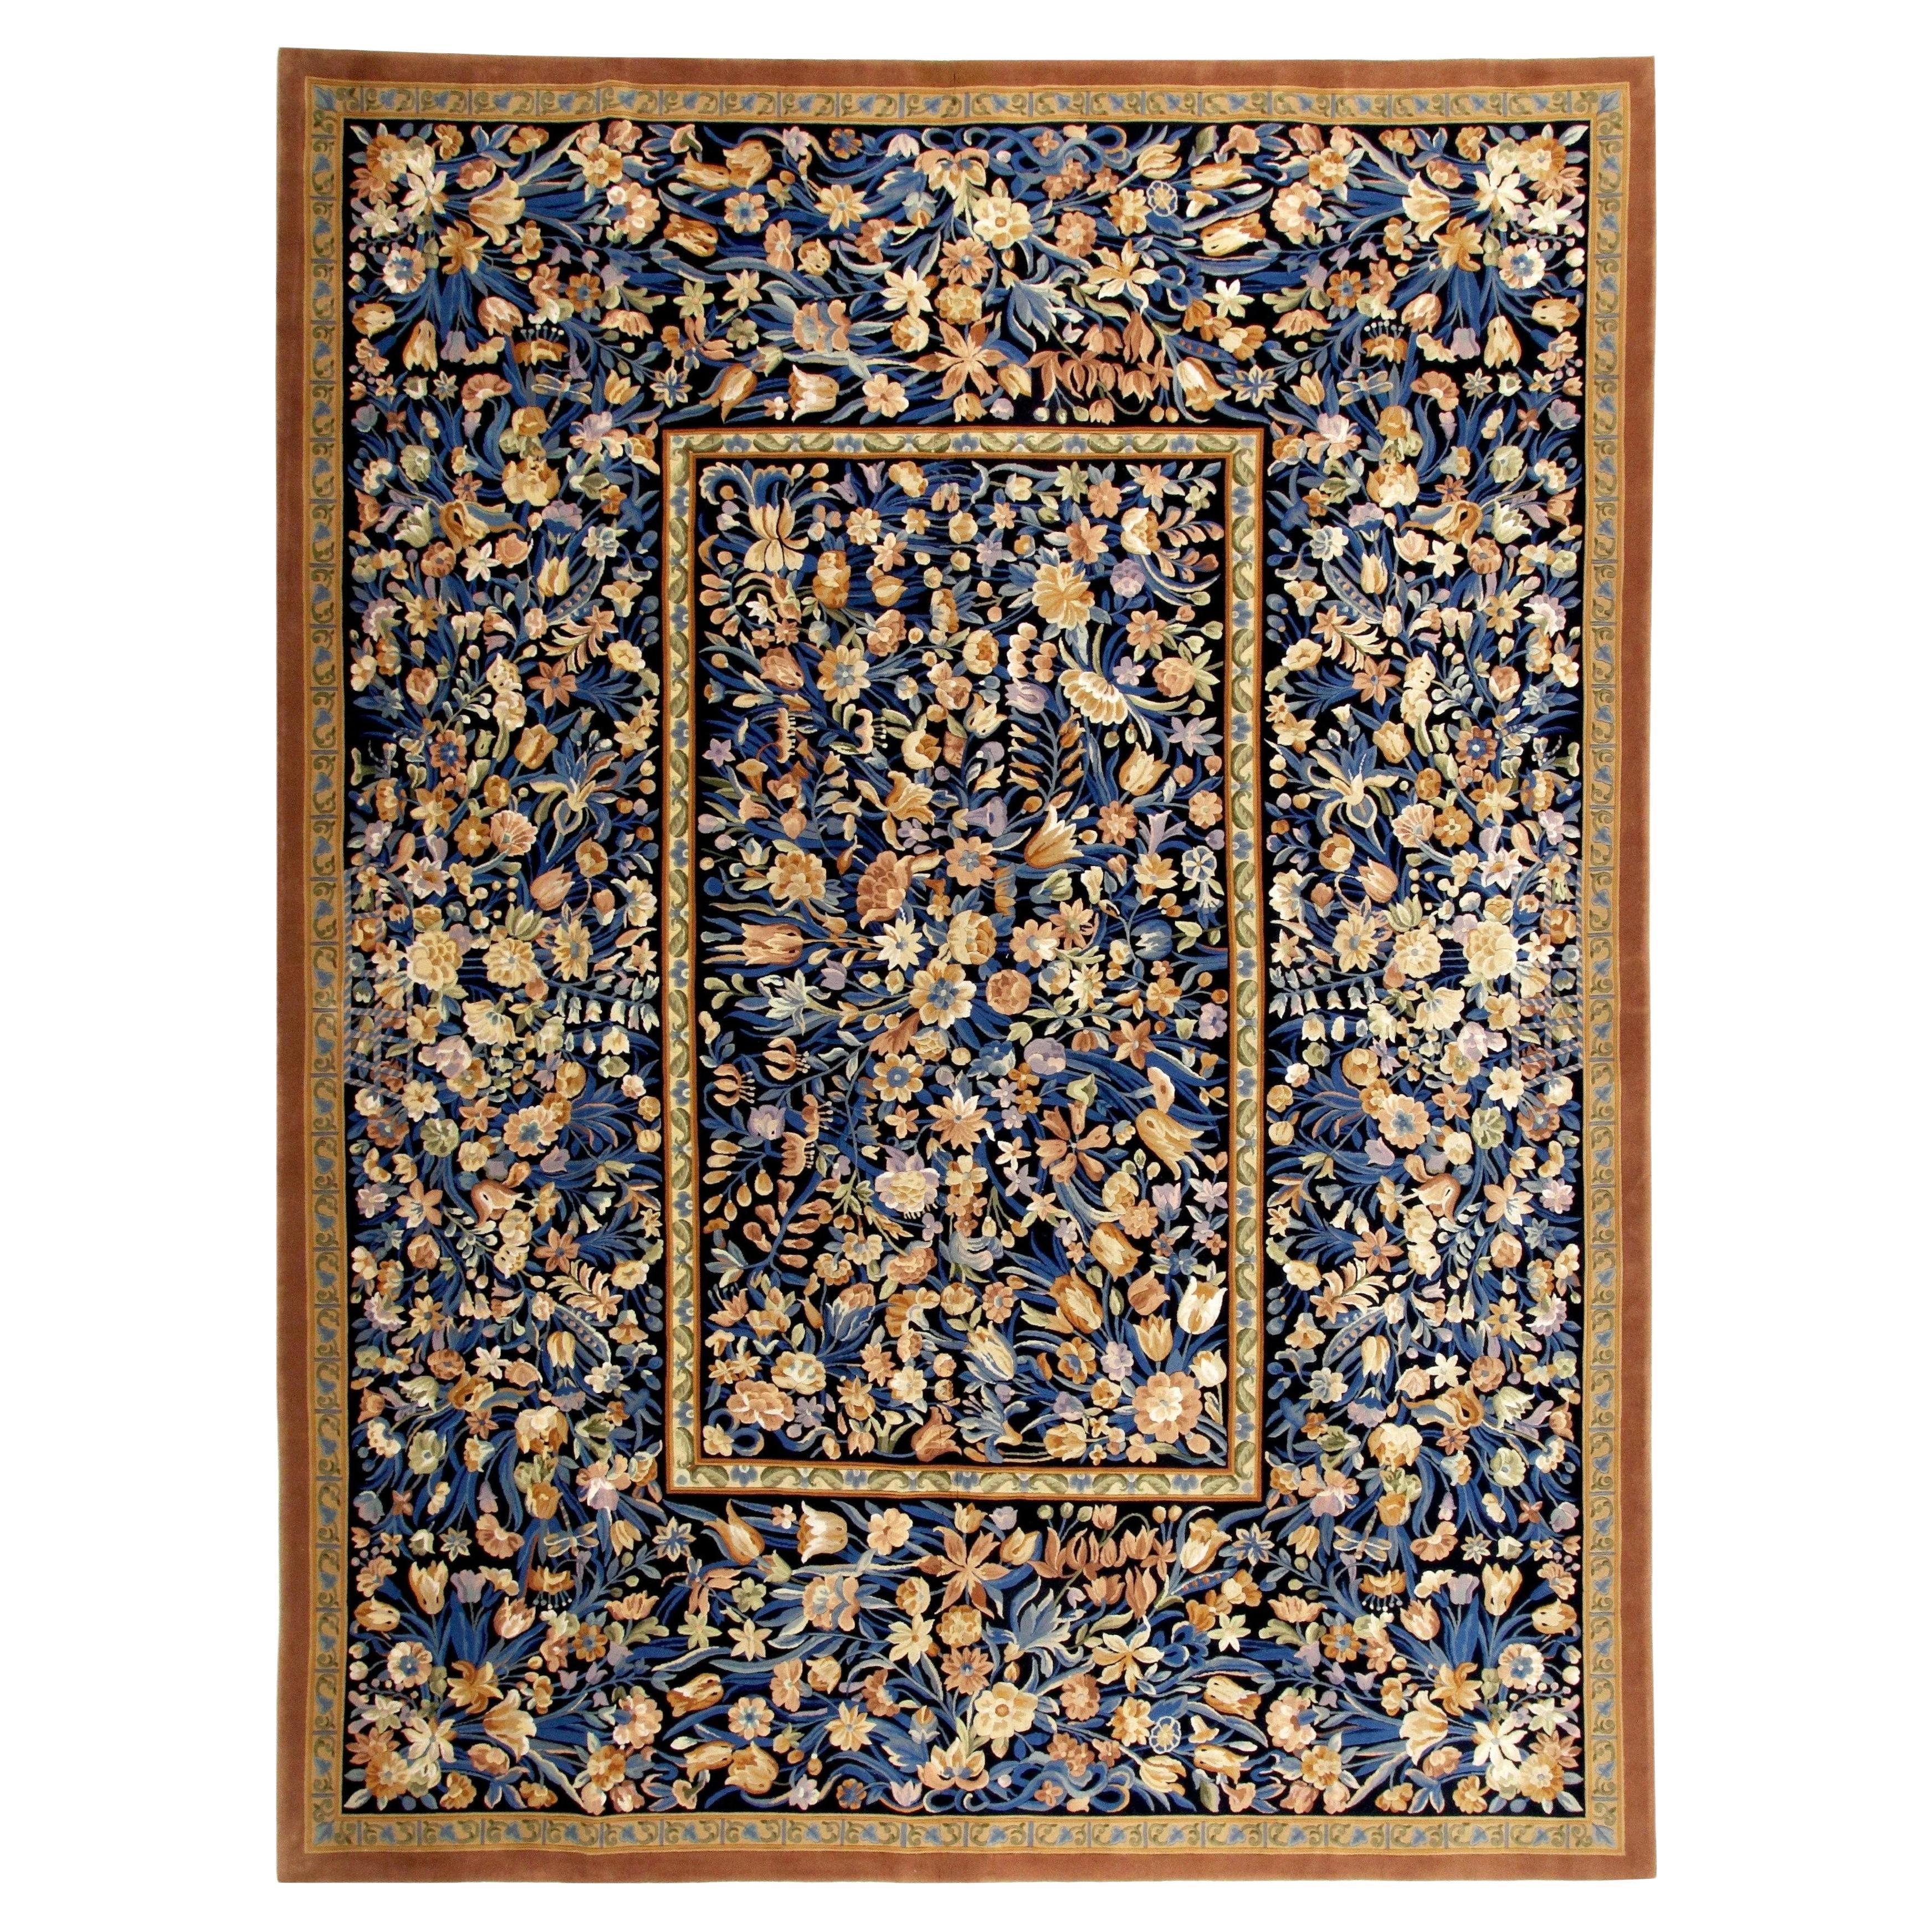 VIA COMO 'Il Giardino' Hand Knotted Wool and Silk Rug 9x12 ft RARE Extra Fine  For Sale